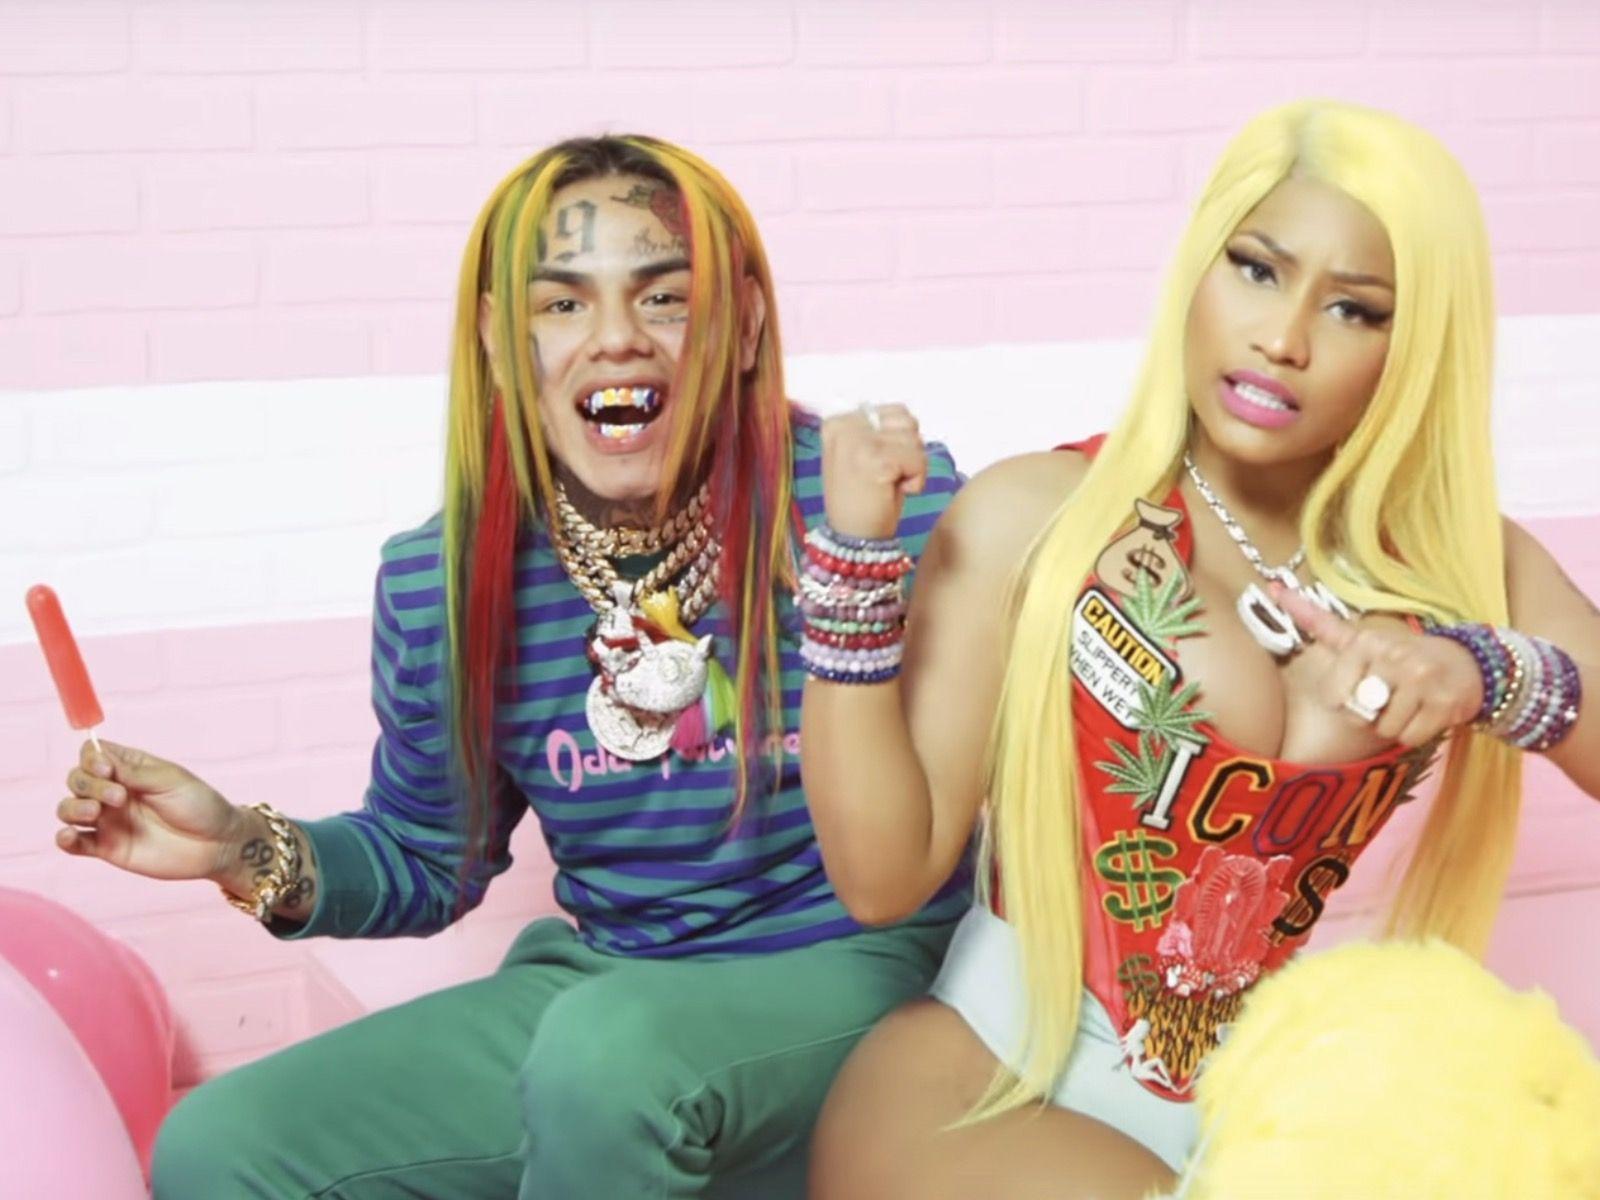 Nicki Minaj Is Forfeiting Her Rap Queen Title by Collabing with 6ix9ine